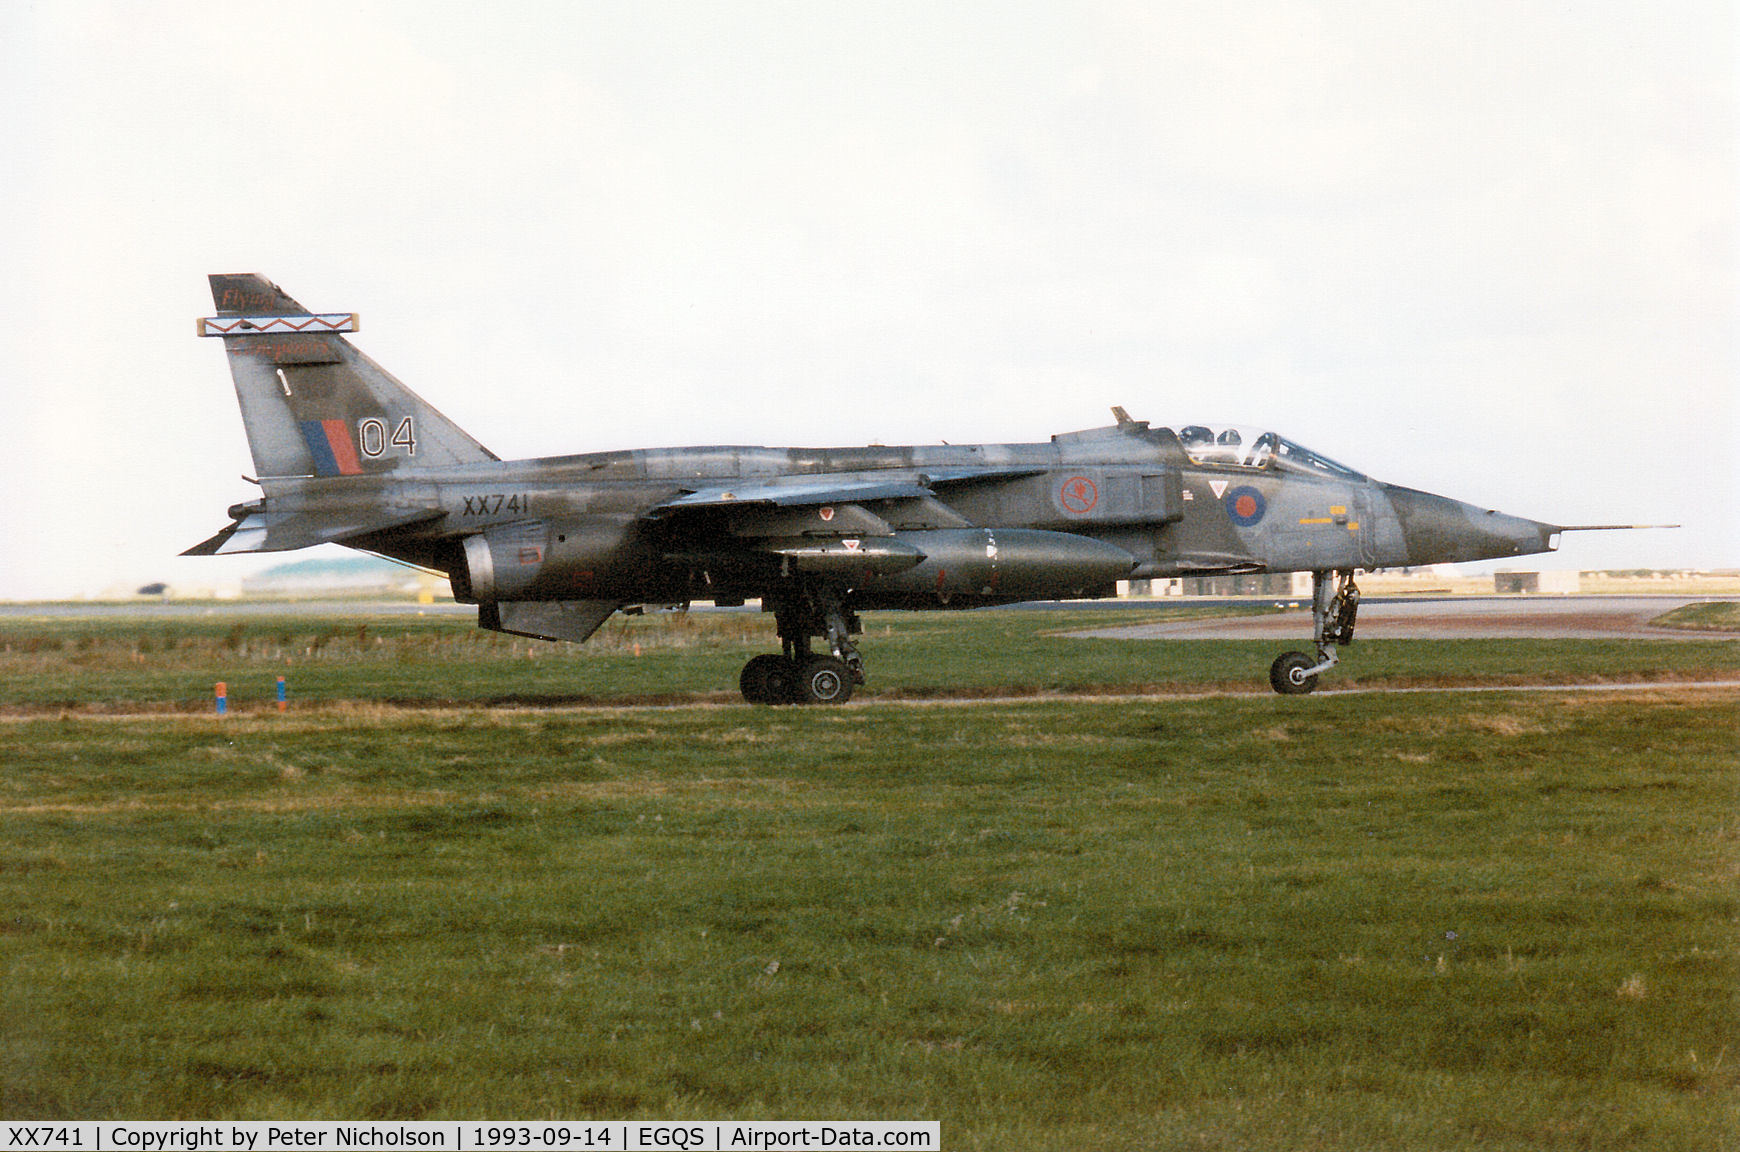 XX741, 1974 Sepecat Jaguar GR.1A C/N S.38, Jaguar GR.1A of 6 Squadron at RAF Coltishall taxying to Runway 05 at RAF Lossiemouth in September 1993.